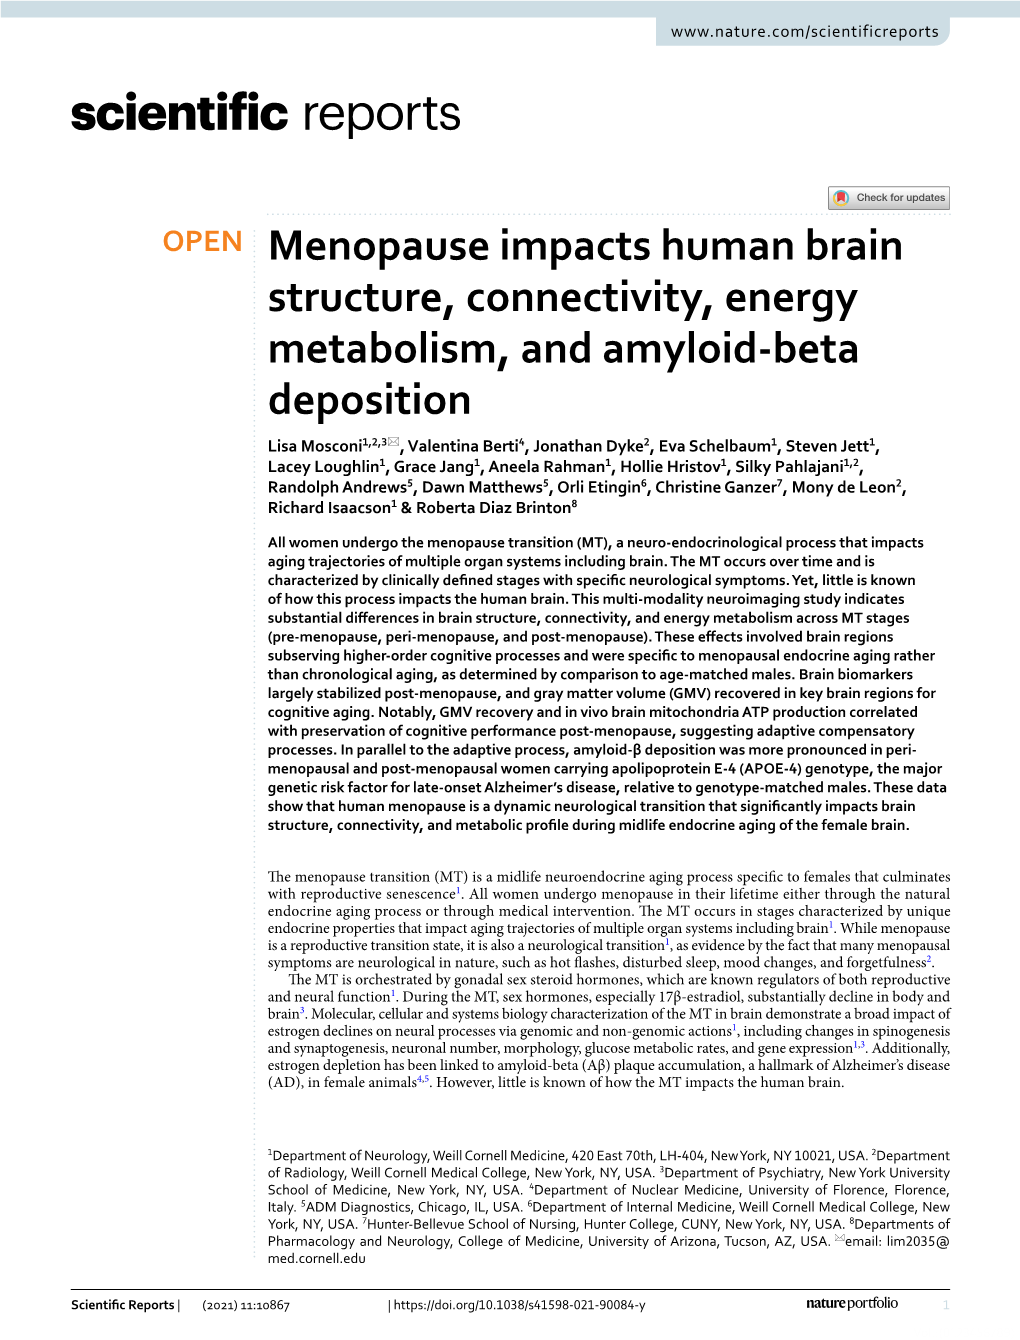 Menopause Impacts Human Brain Structure, Connectivity, Energy